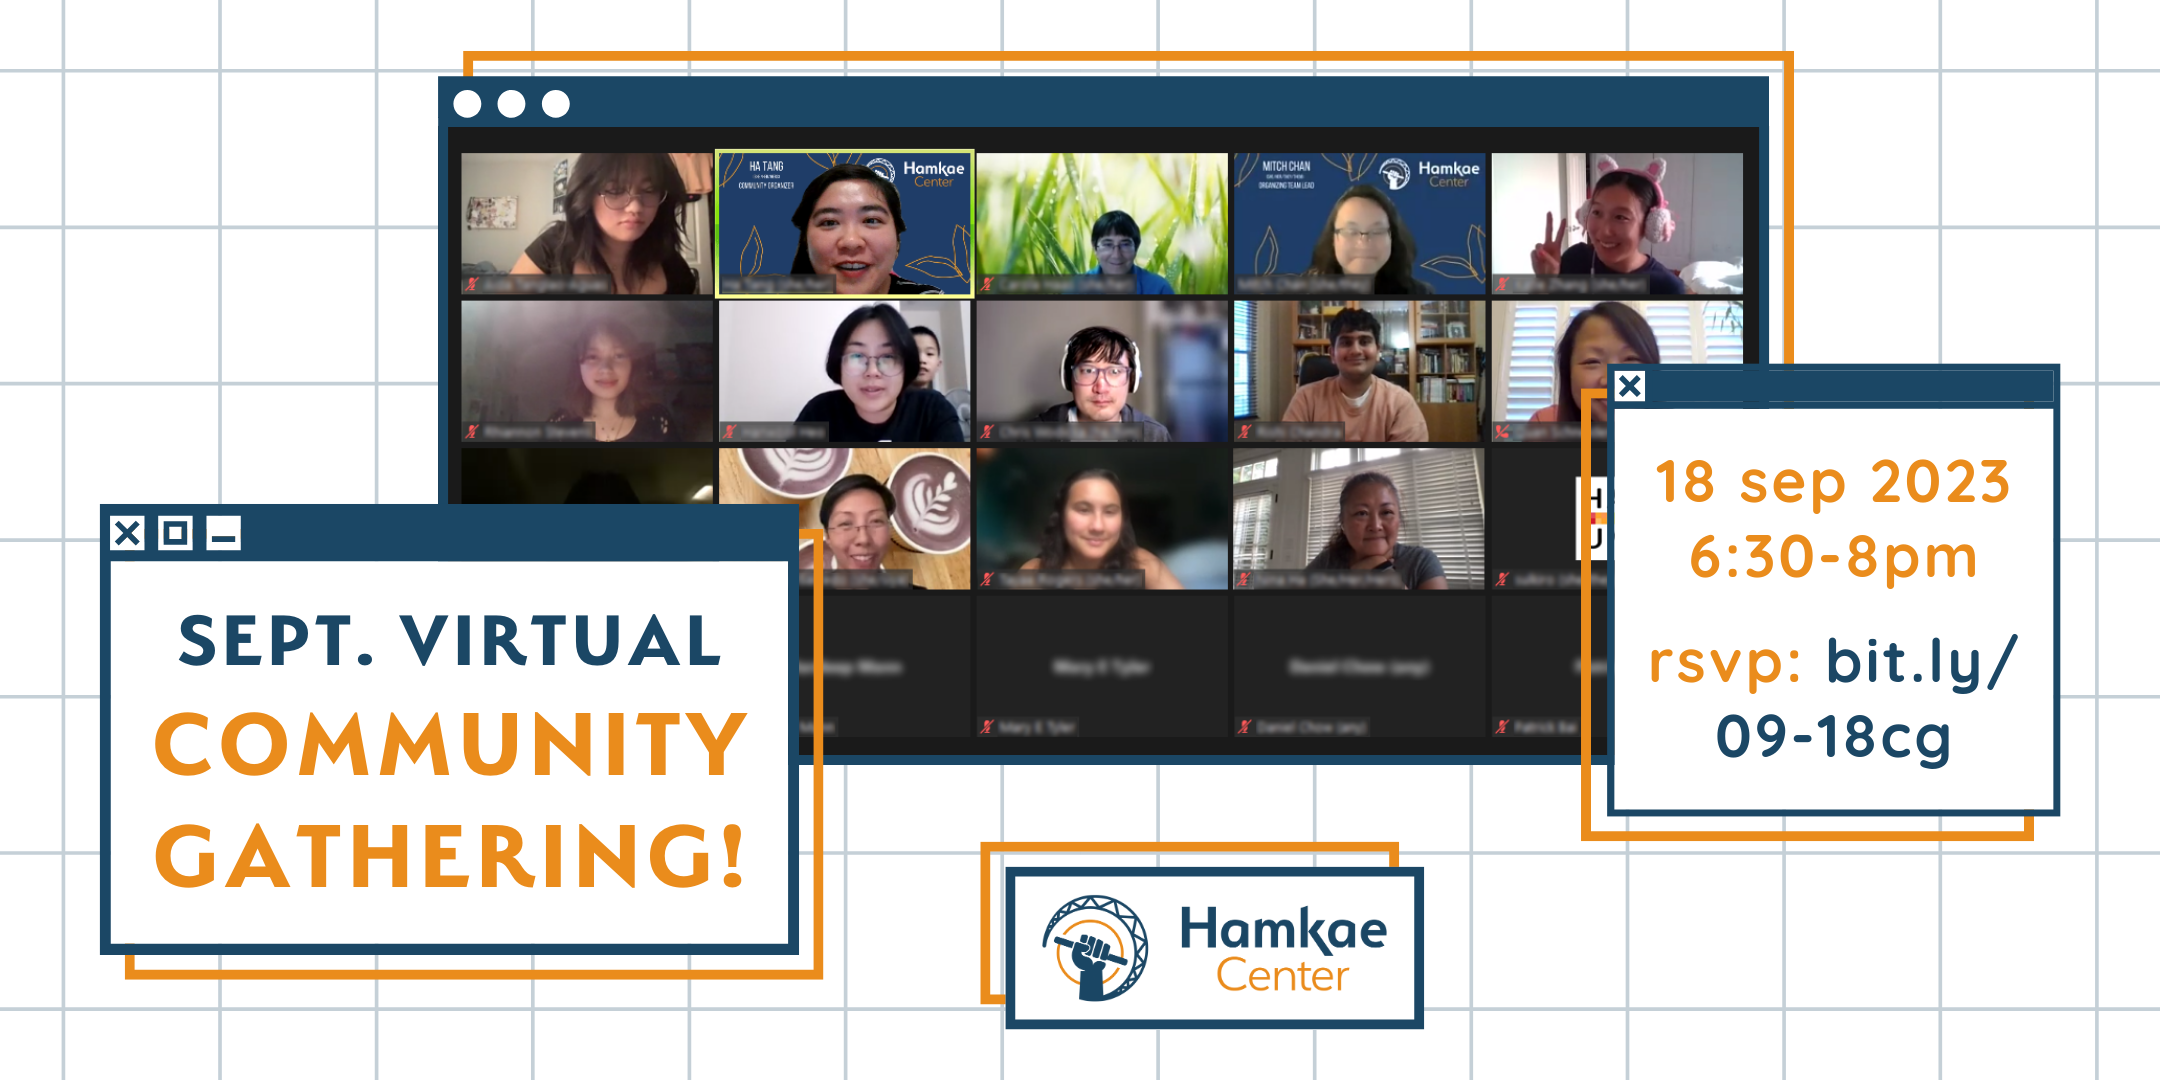 Graphic with a photo of Hamkae Center staff and community members smiling for a screenshot during a virtual meeting, advertising Hamkae Center's Sept. Virtual Community Gathering on September 18, 2023 at 6:30-8pm. RSVP: bit.ly/09-18cg